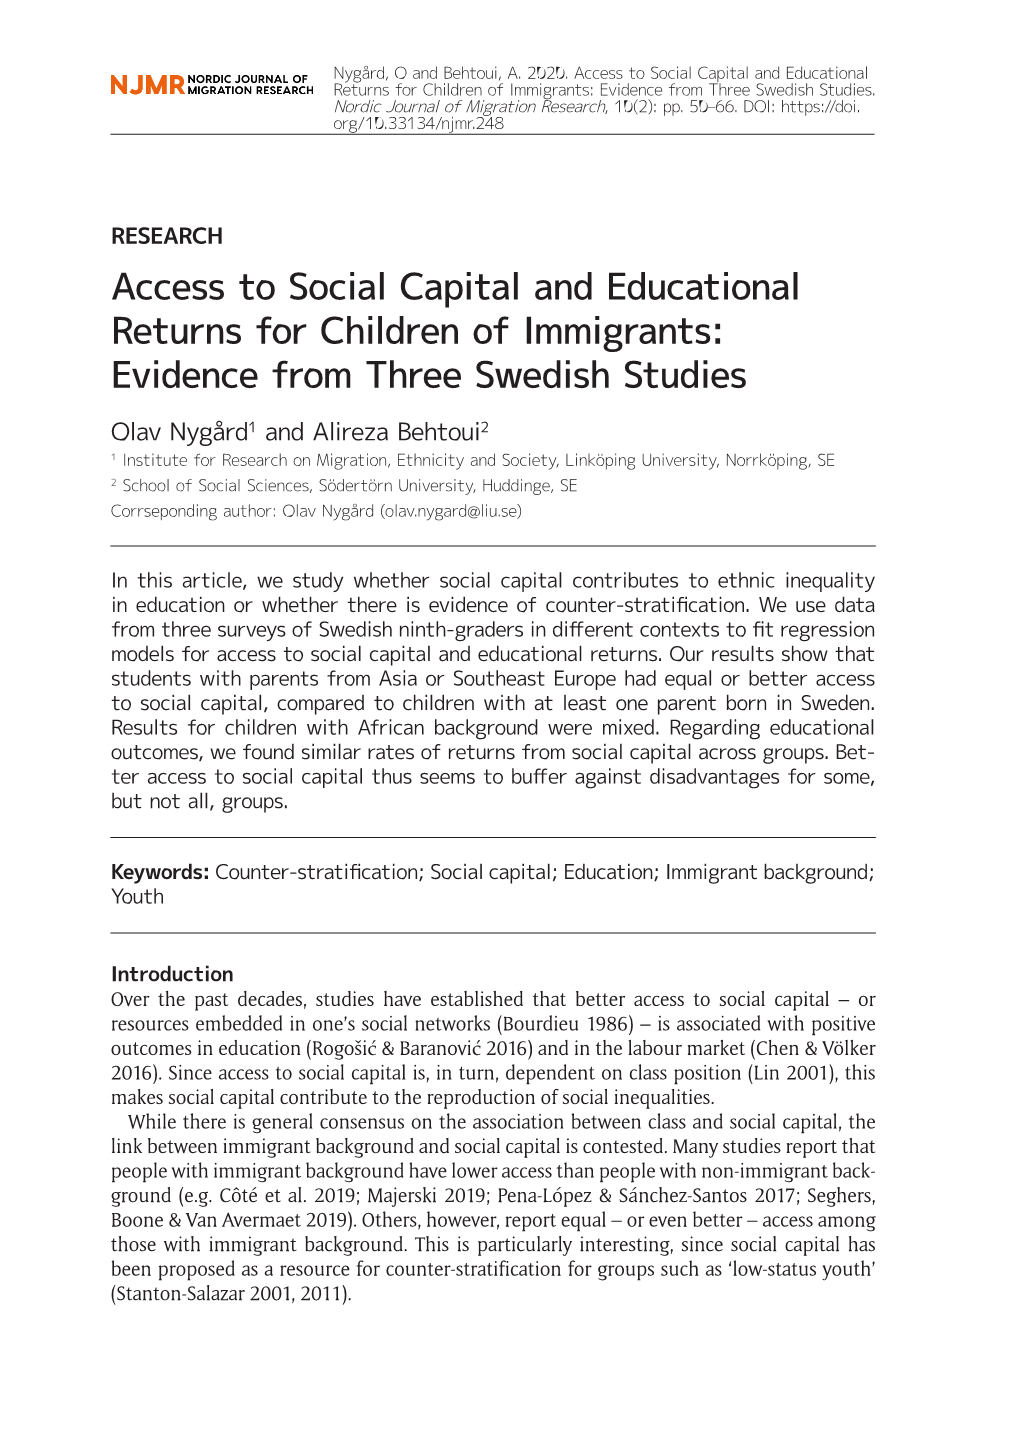 Access to Social Capital and Educational Returns for Children of Immigrants: Evidence from Three Swedish Studies